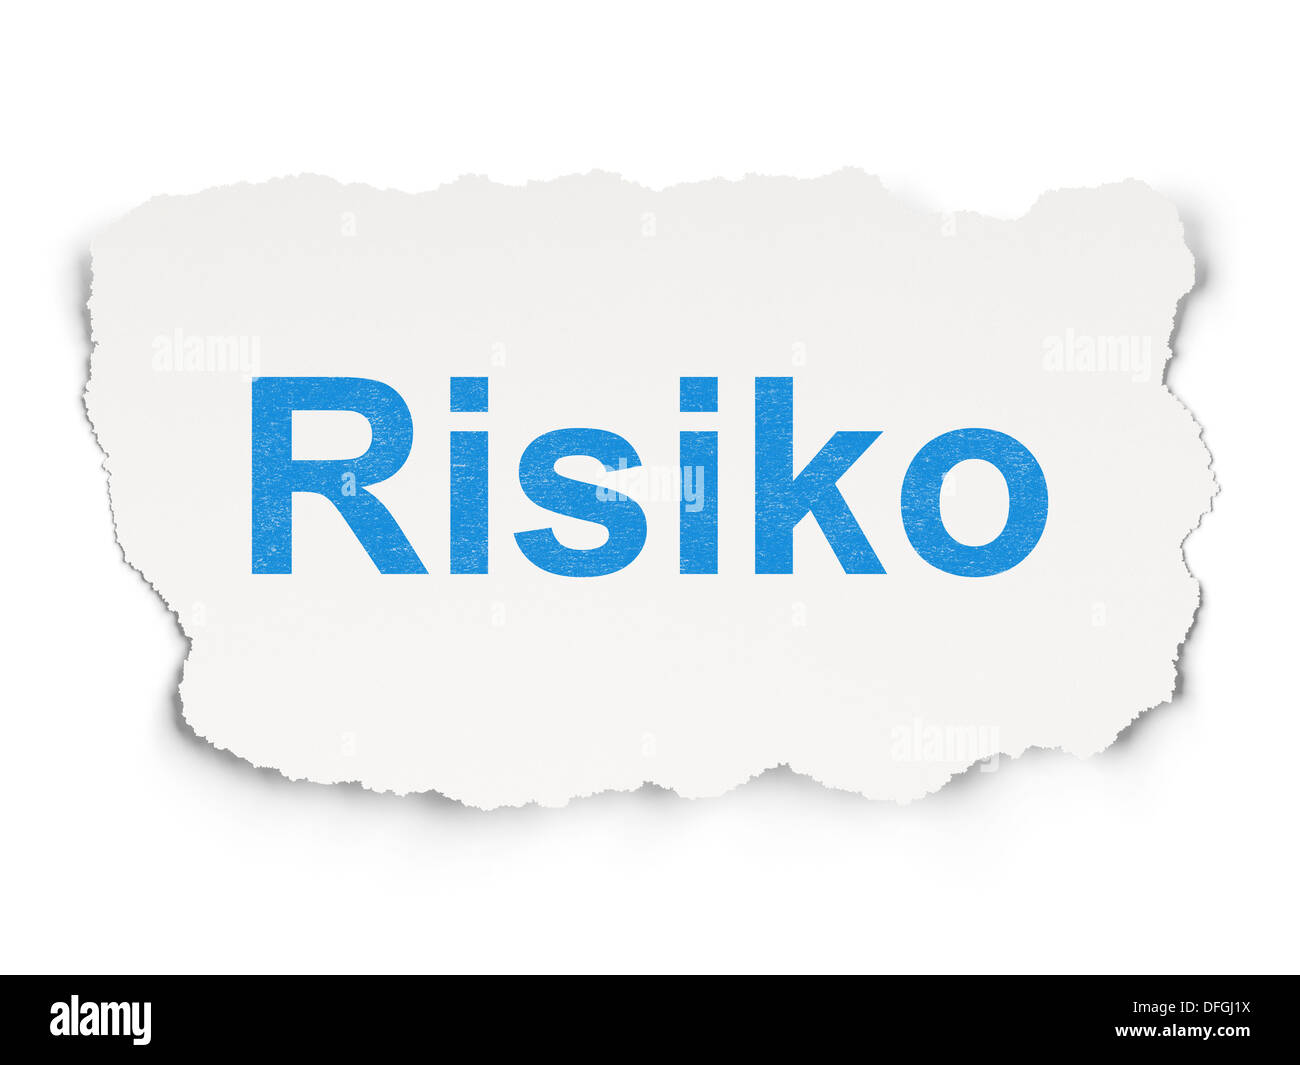 Finance concept: Risiko(german) on Paper background Stock Photo